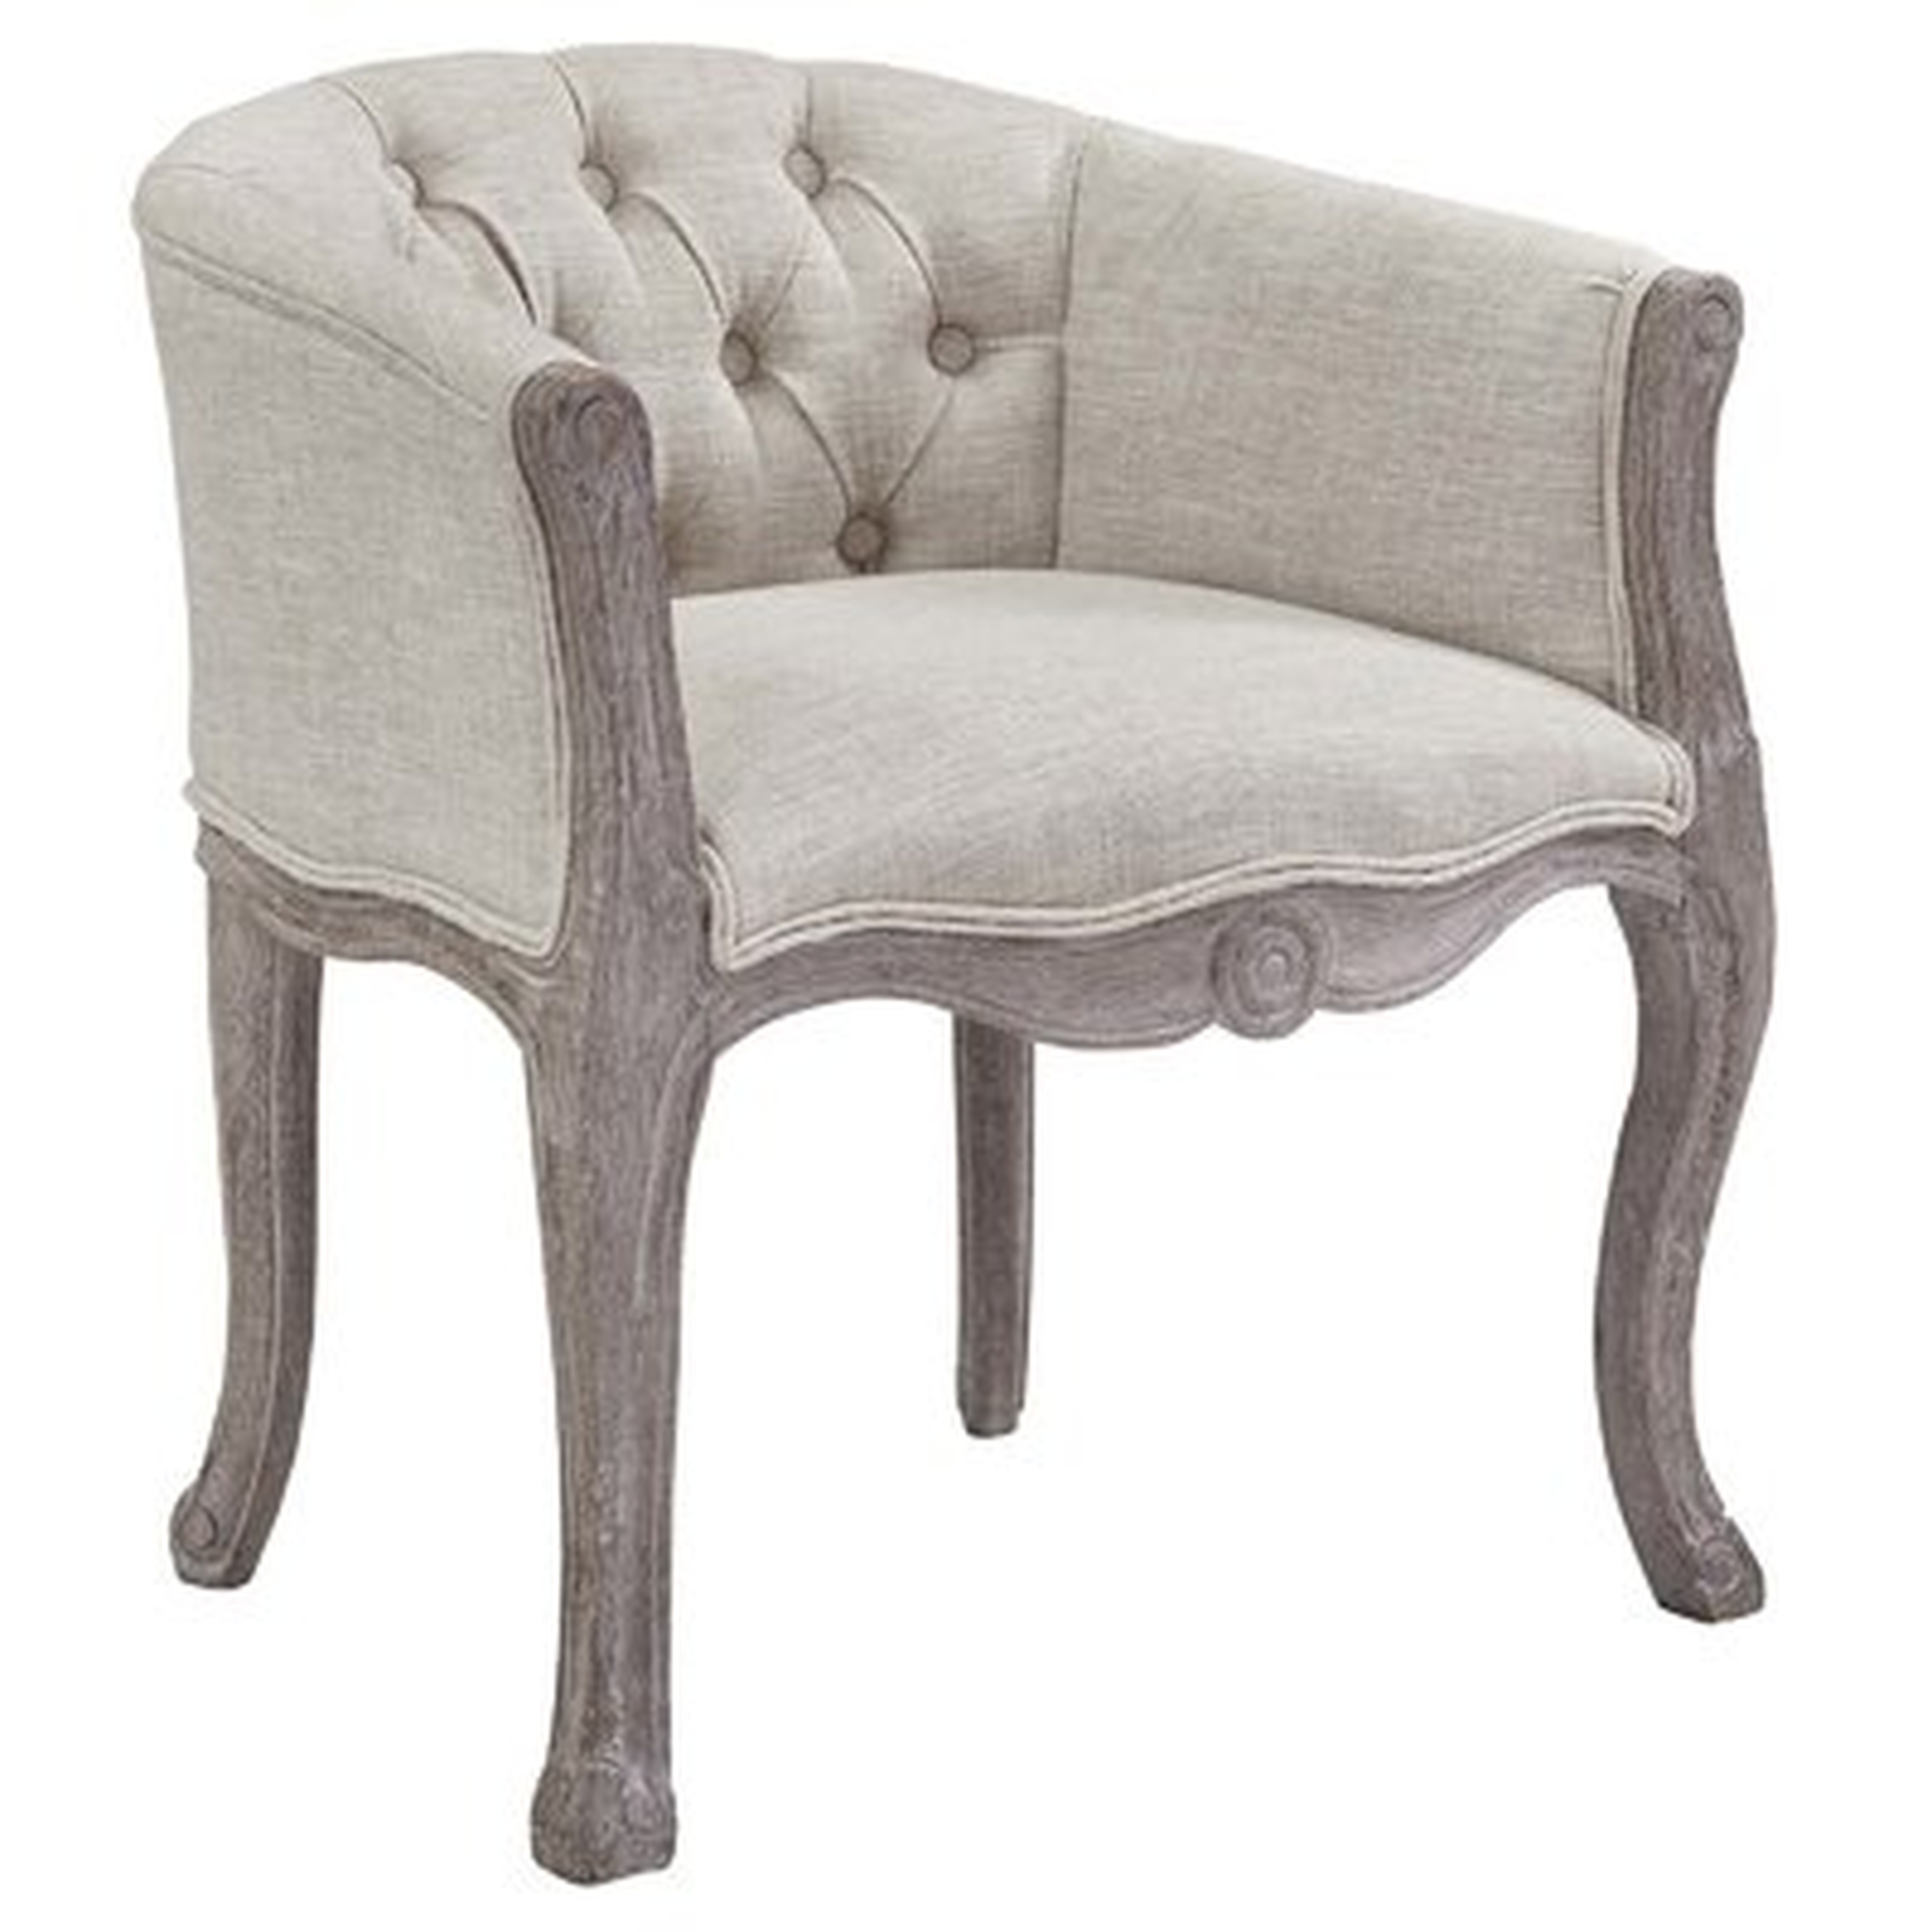 Vasques Vintage French Upholstered Dining Chair - Wayfair